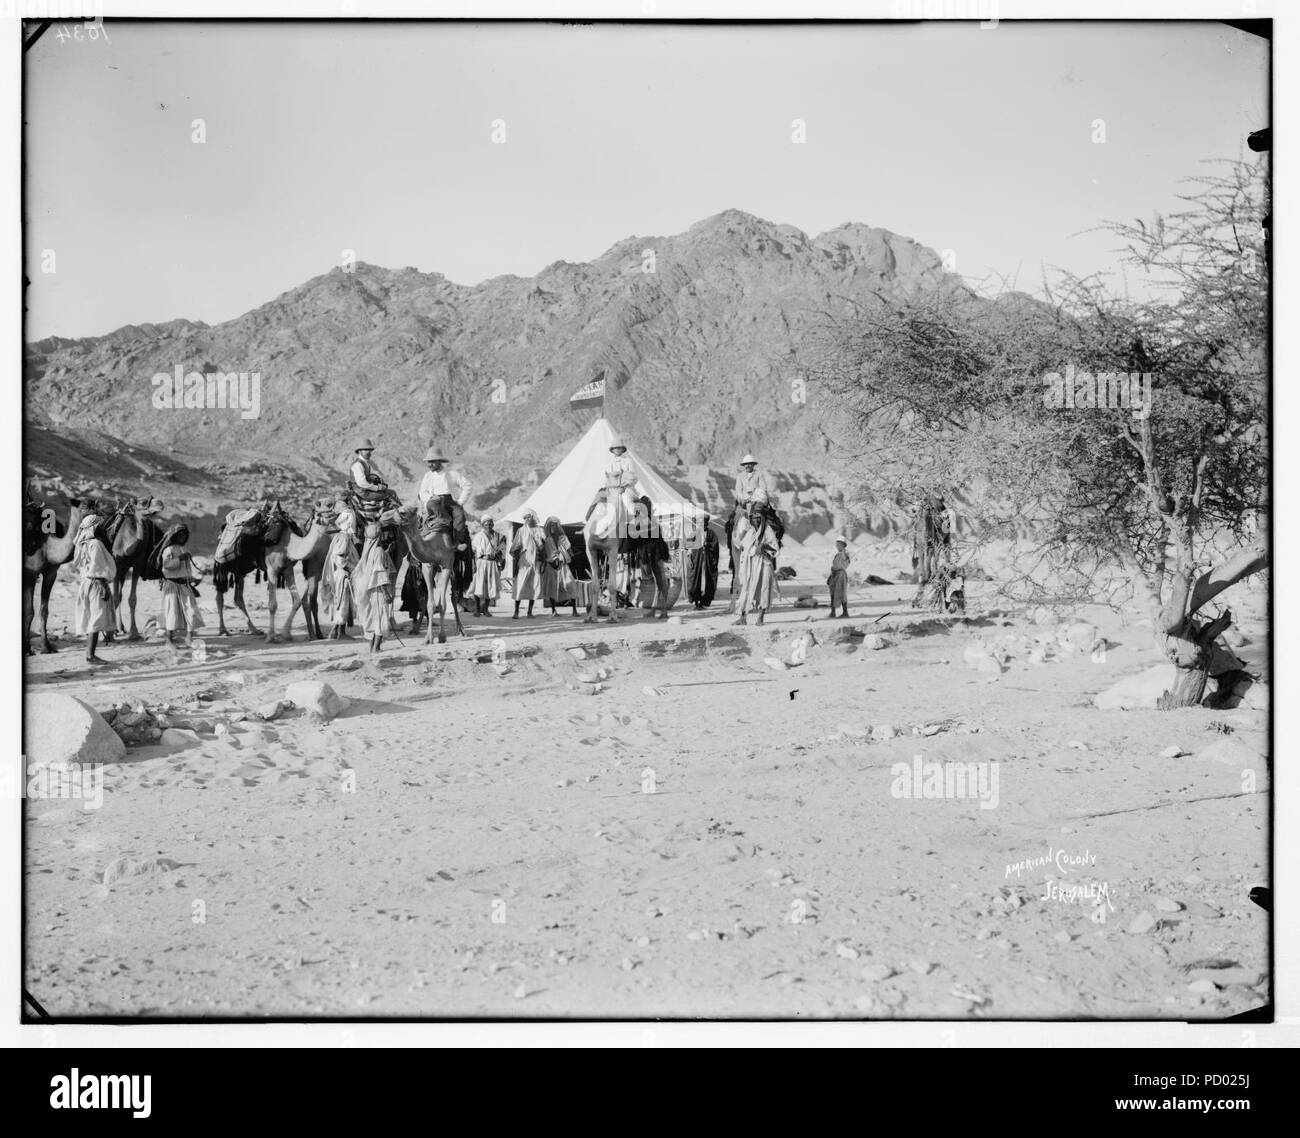 American Colony Photo Dept. expedition camp in the Sinai, Lewis Larsson on camel directly in front of tent Stock Photo